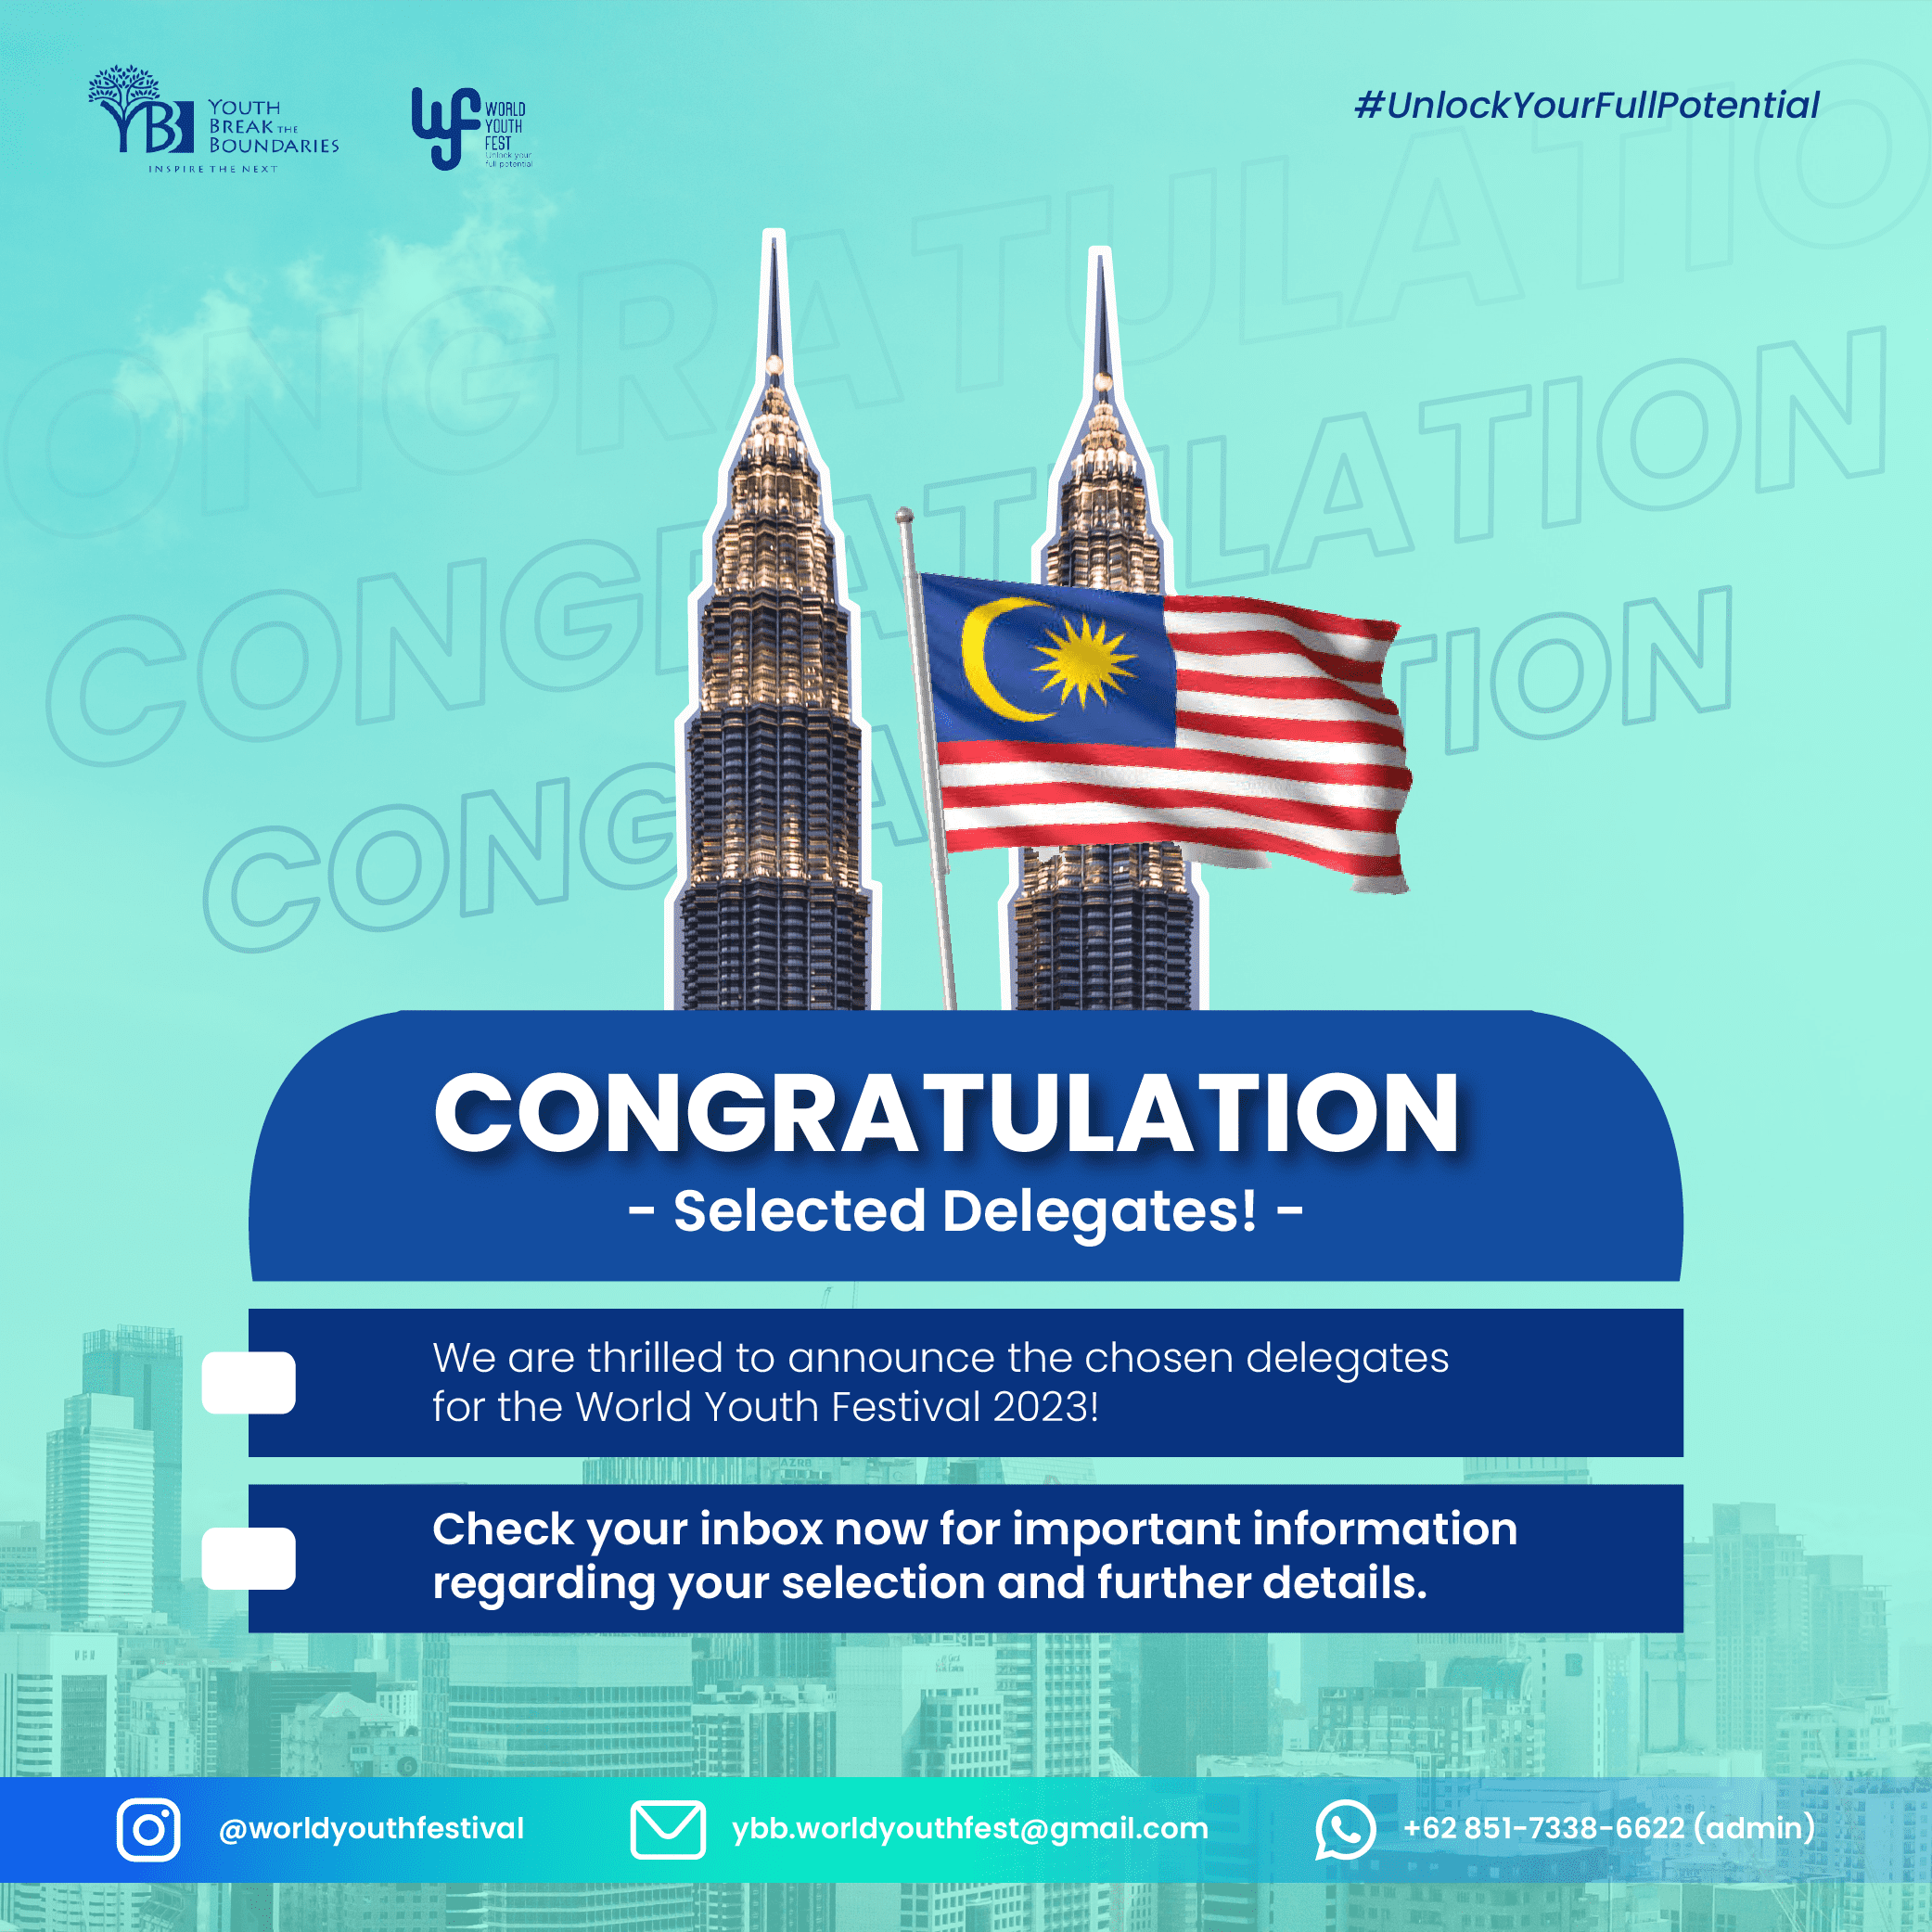 Congratulations To The Selected Delegates For The Highly Anticipated World Youth Festival in Malaysia!